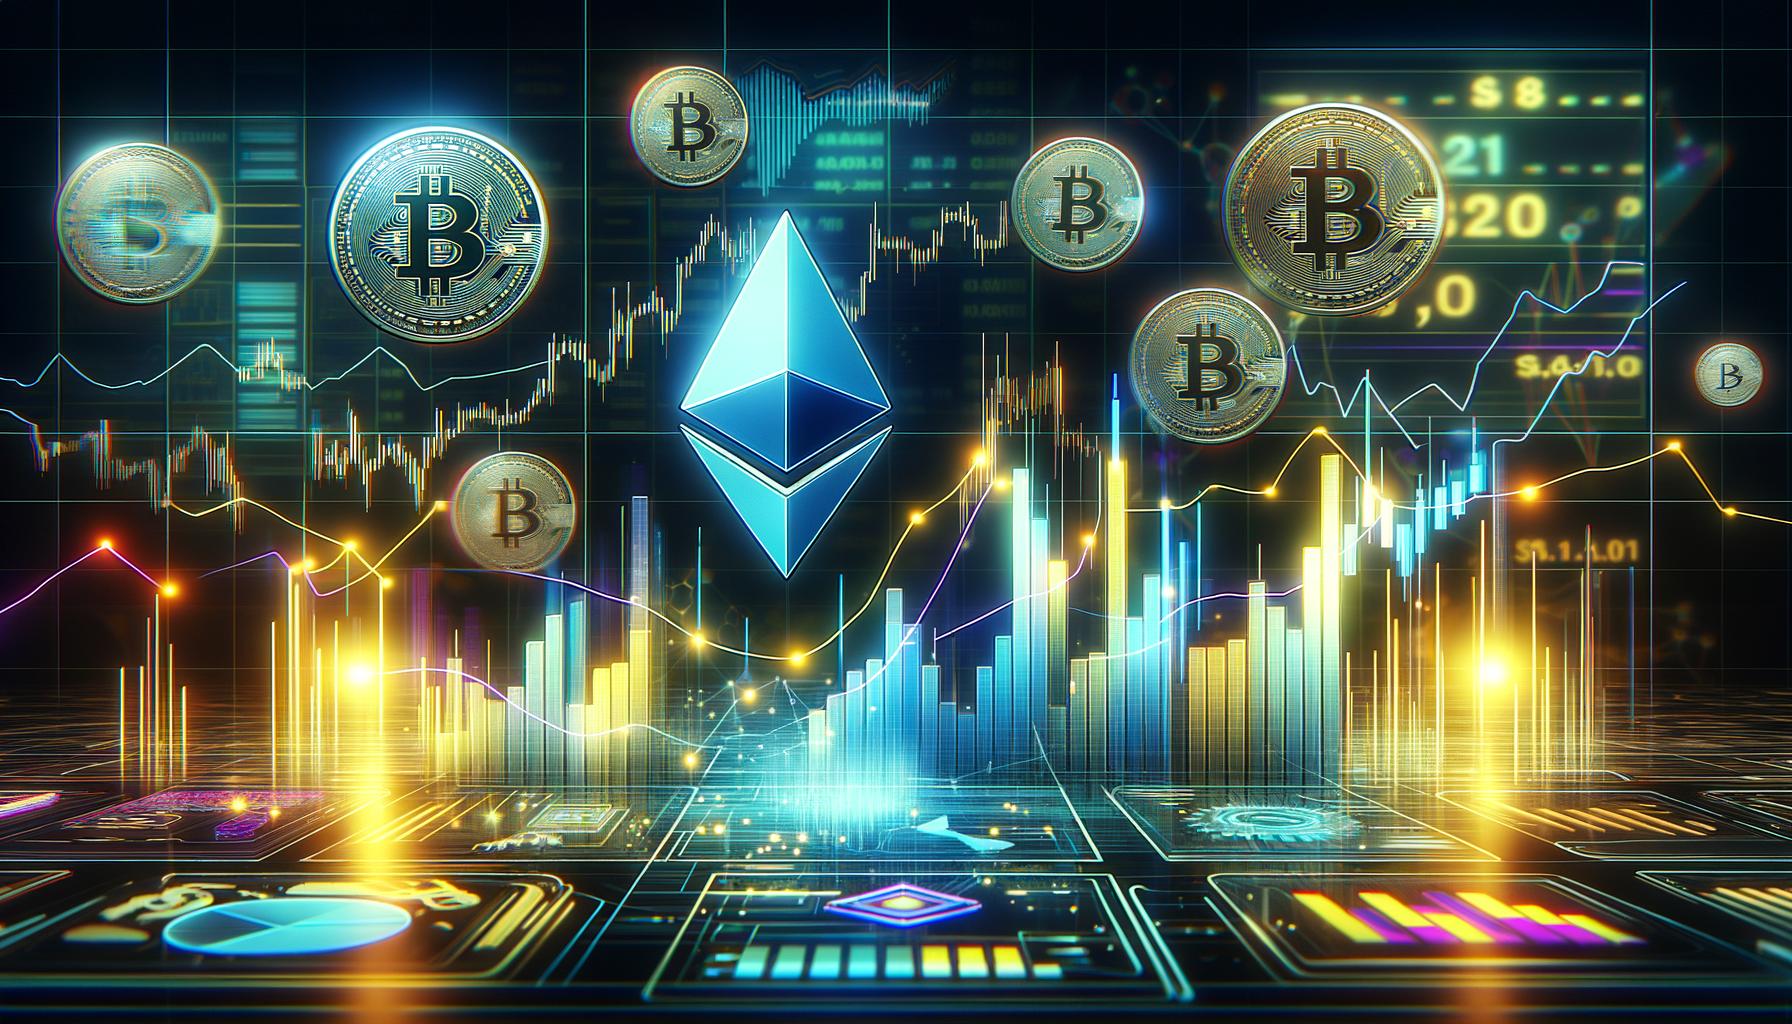 Ethereum price tested the $3,040 zone and corrected gains. ETH is now testing the $2,925 support and might aim for a fresh increase. Ethereum started a downside correction after the bears defended $3,040. The price is trading below $2,960 and the 100-hourly Simple Moving Average. There is a connecting bearish trend line forming with resistance at $2,965 on the hourly chart of ETH/USD (data feed via Kraken). The pair could start a fresh increase unless there is a close below the $2,925 support. Ethereum Price Dips Again Ethereum price started a fresh increase above the $2,950 and $2,960 levels, like Bitcoin. ETH even cleared the $3,000 level before the bears appeared near $3,040. A new weekly high was formed at $3,039 and the price recently started a downside correction. There was a move below the $3,000 level. Ether dipped below the 50% Fib retracement level of the upward move from the $2,860 swing low to the $3,039 high. Ethereum is now trading below $2,960 and the 100-hourly Simple Moving Average. However, the bulls are active near the $2,925 support and the 61.8% Fib retracement level of the upward move from the $2,860 swing low to the $3,039 high. Immediate resistance is near the $2,960 level. There is also a connecting bearish trend line forming with resistance at $2,965 on the hourly chart of ETH/USD. The first major resistance is near the $3,000 level. An upside break above the $3,000 resistance might send the price higher. The next key resistance sits at $3,050, above which the price might gain traction and rise toward the $3,150 level. If there is a clear move above the $3,150 level, the price might rise and test the $3,220 resistance. Any more gains could send Ether toward the $3,350 resistance zone. More Losses In ETH? If Ethereum fails to clear the $2,965 resistance and the trend line, it could continue to move down. Initial support on the downside is near the $2,925 level. The next major support is near the $2,900 zone. A clear move below the $2,900 support might push the price toward $2,850. Any more losses might send the price toward the $2,740 level in the near term. Technical Indicators Hourly MACD – The MACD for ETH/USD is losing momentum in the bearish zone. Hourly RSI – The RSI for ETH/USD is now below the 50 level. Major Support Level – $2,925 Major Resistance Level – $2,965